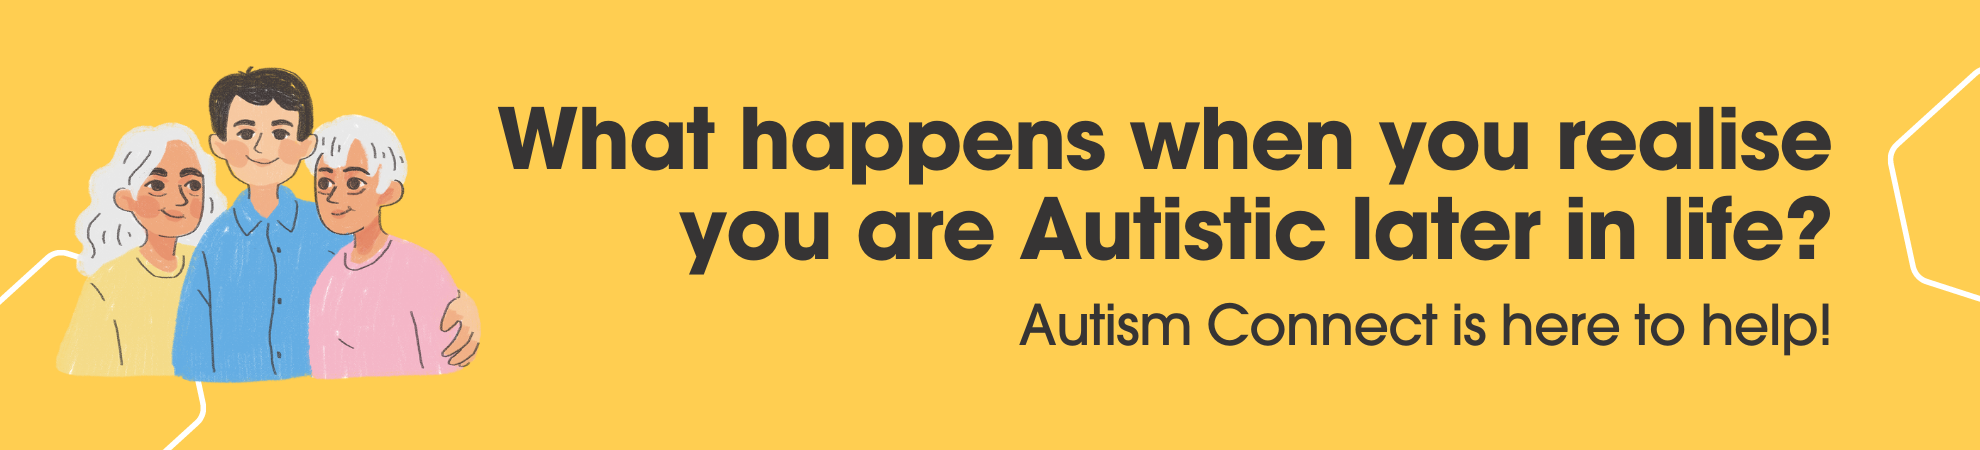 What happens when you realise you are Autistic later in life? Autism Connect is here to help!